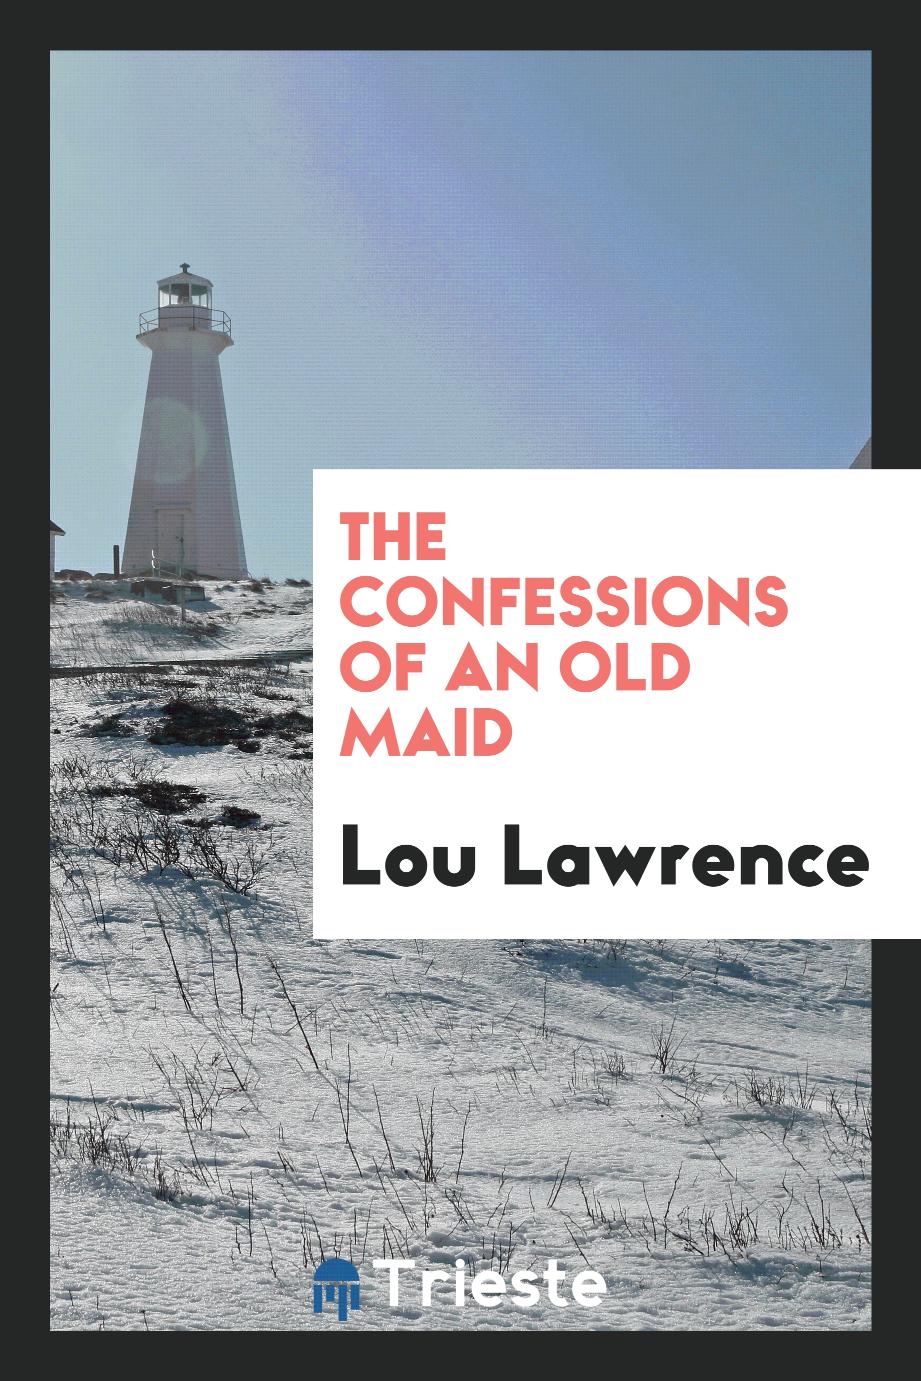 The Confessions of an Old Maid